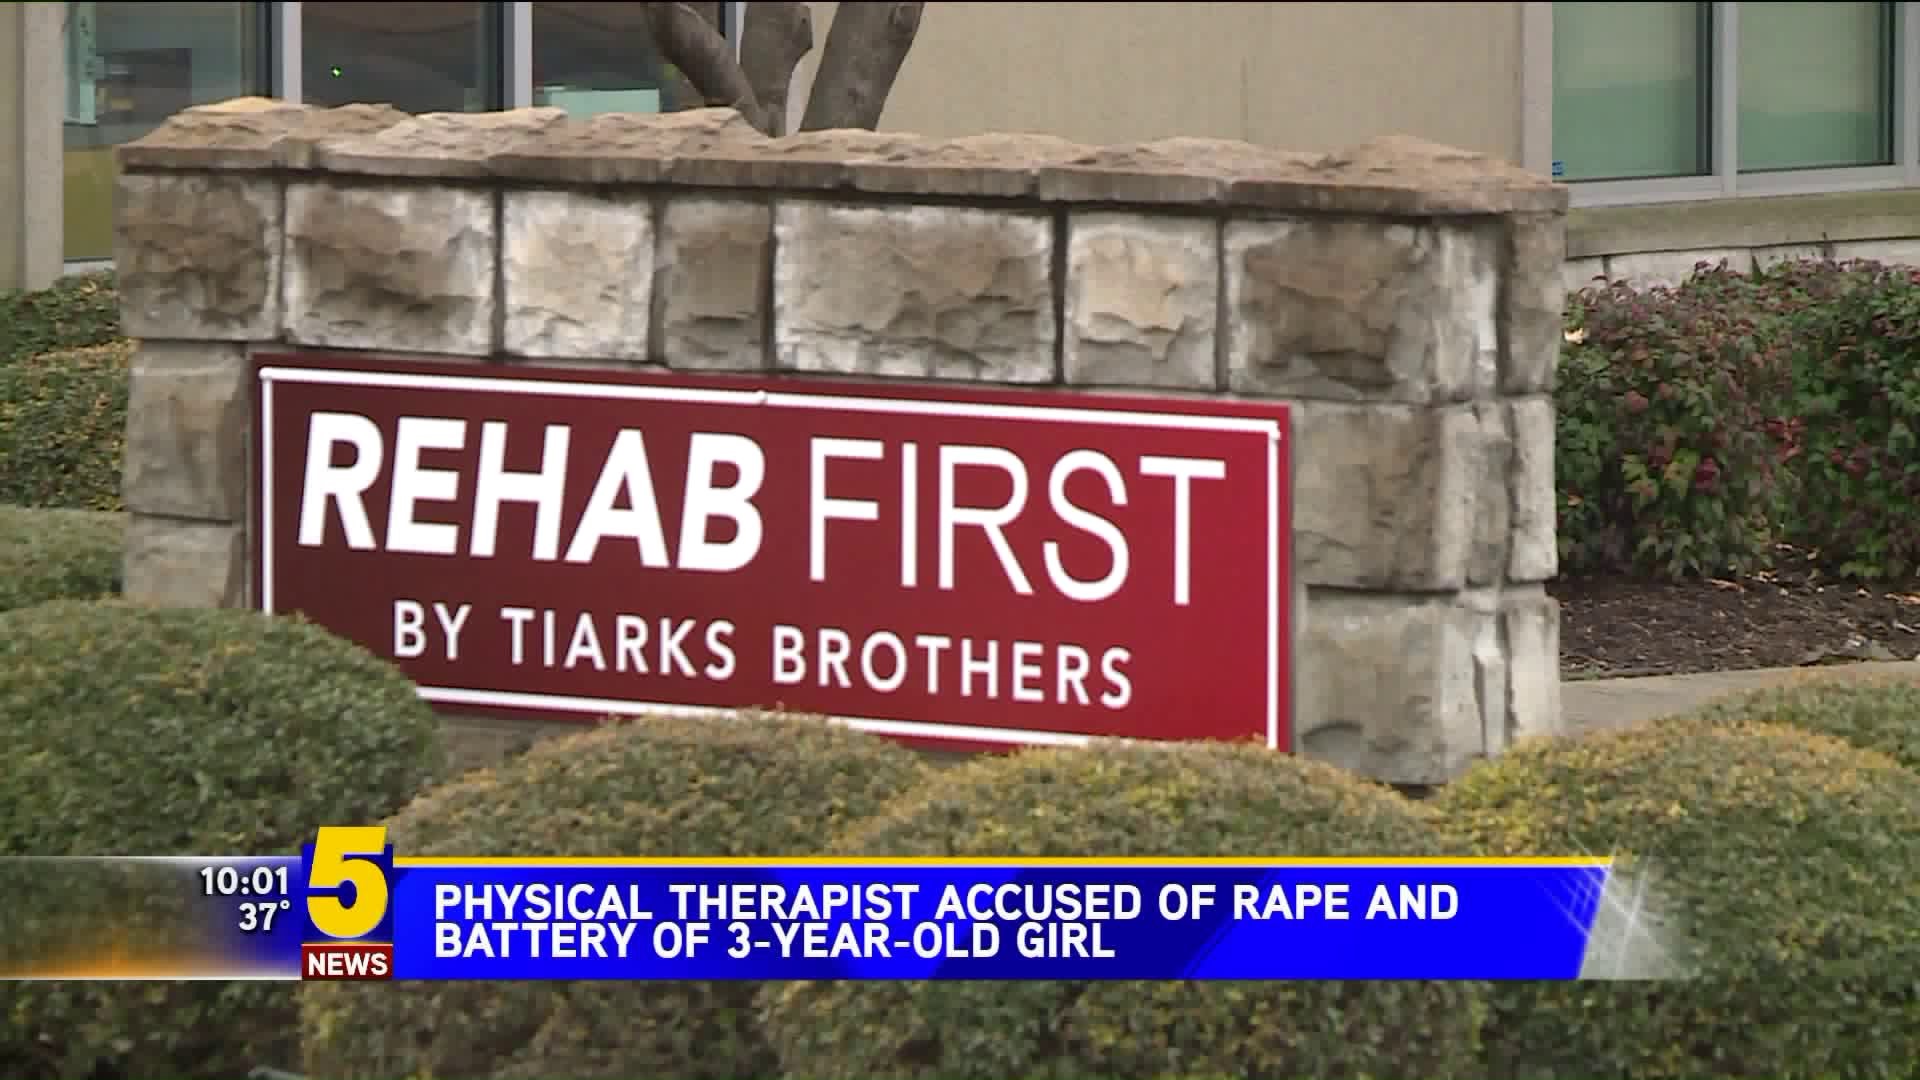 physical therapist accused of rape and battery of 3-year-old